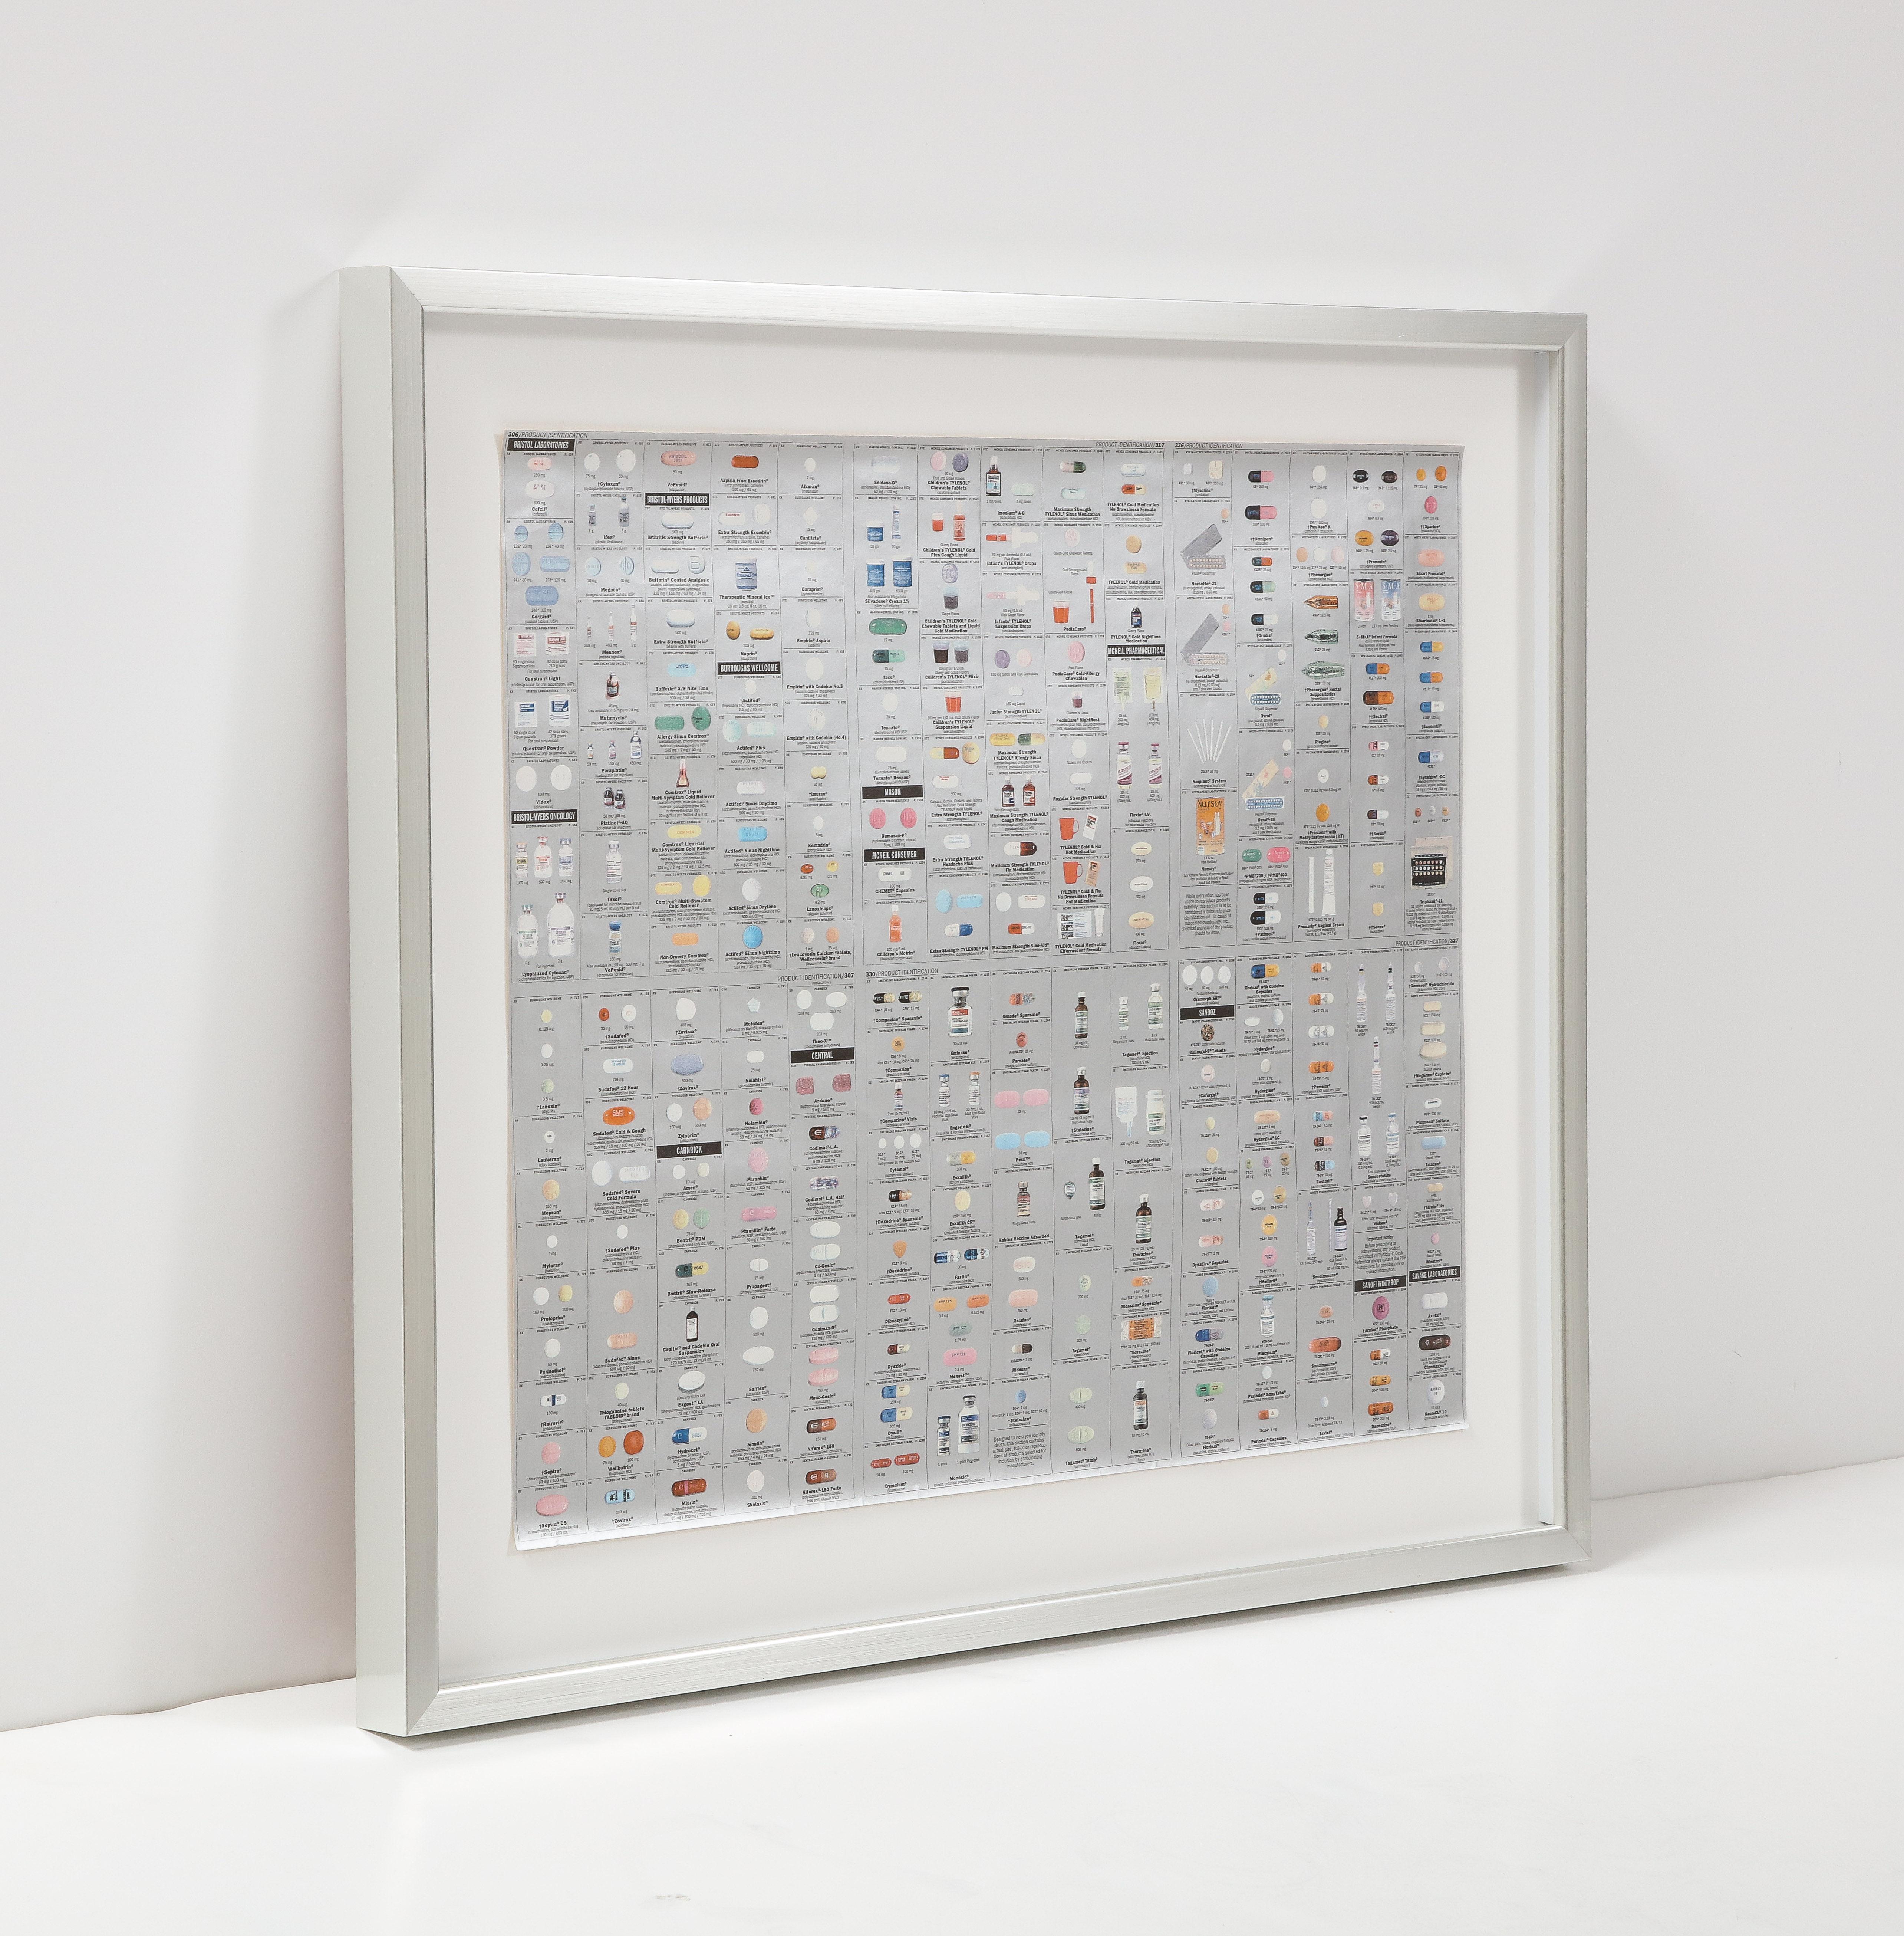 Damien Hirst wallpaper fragment from the famed Pharmacy restaurant in London. Fragment shows variuos pills and bottles all printed on silver metallic paper. This fragment shows the original design - pills depicting the actual names. Later Hirst